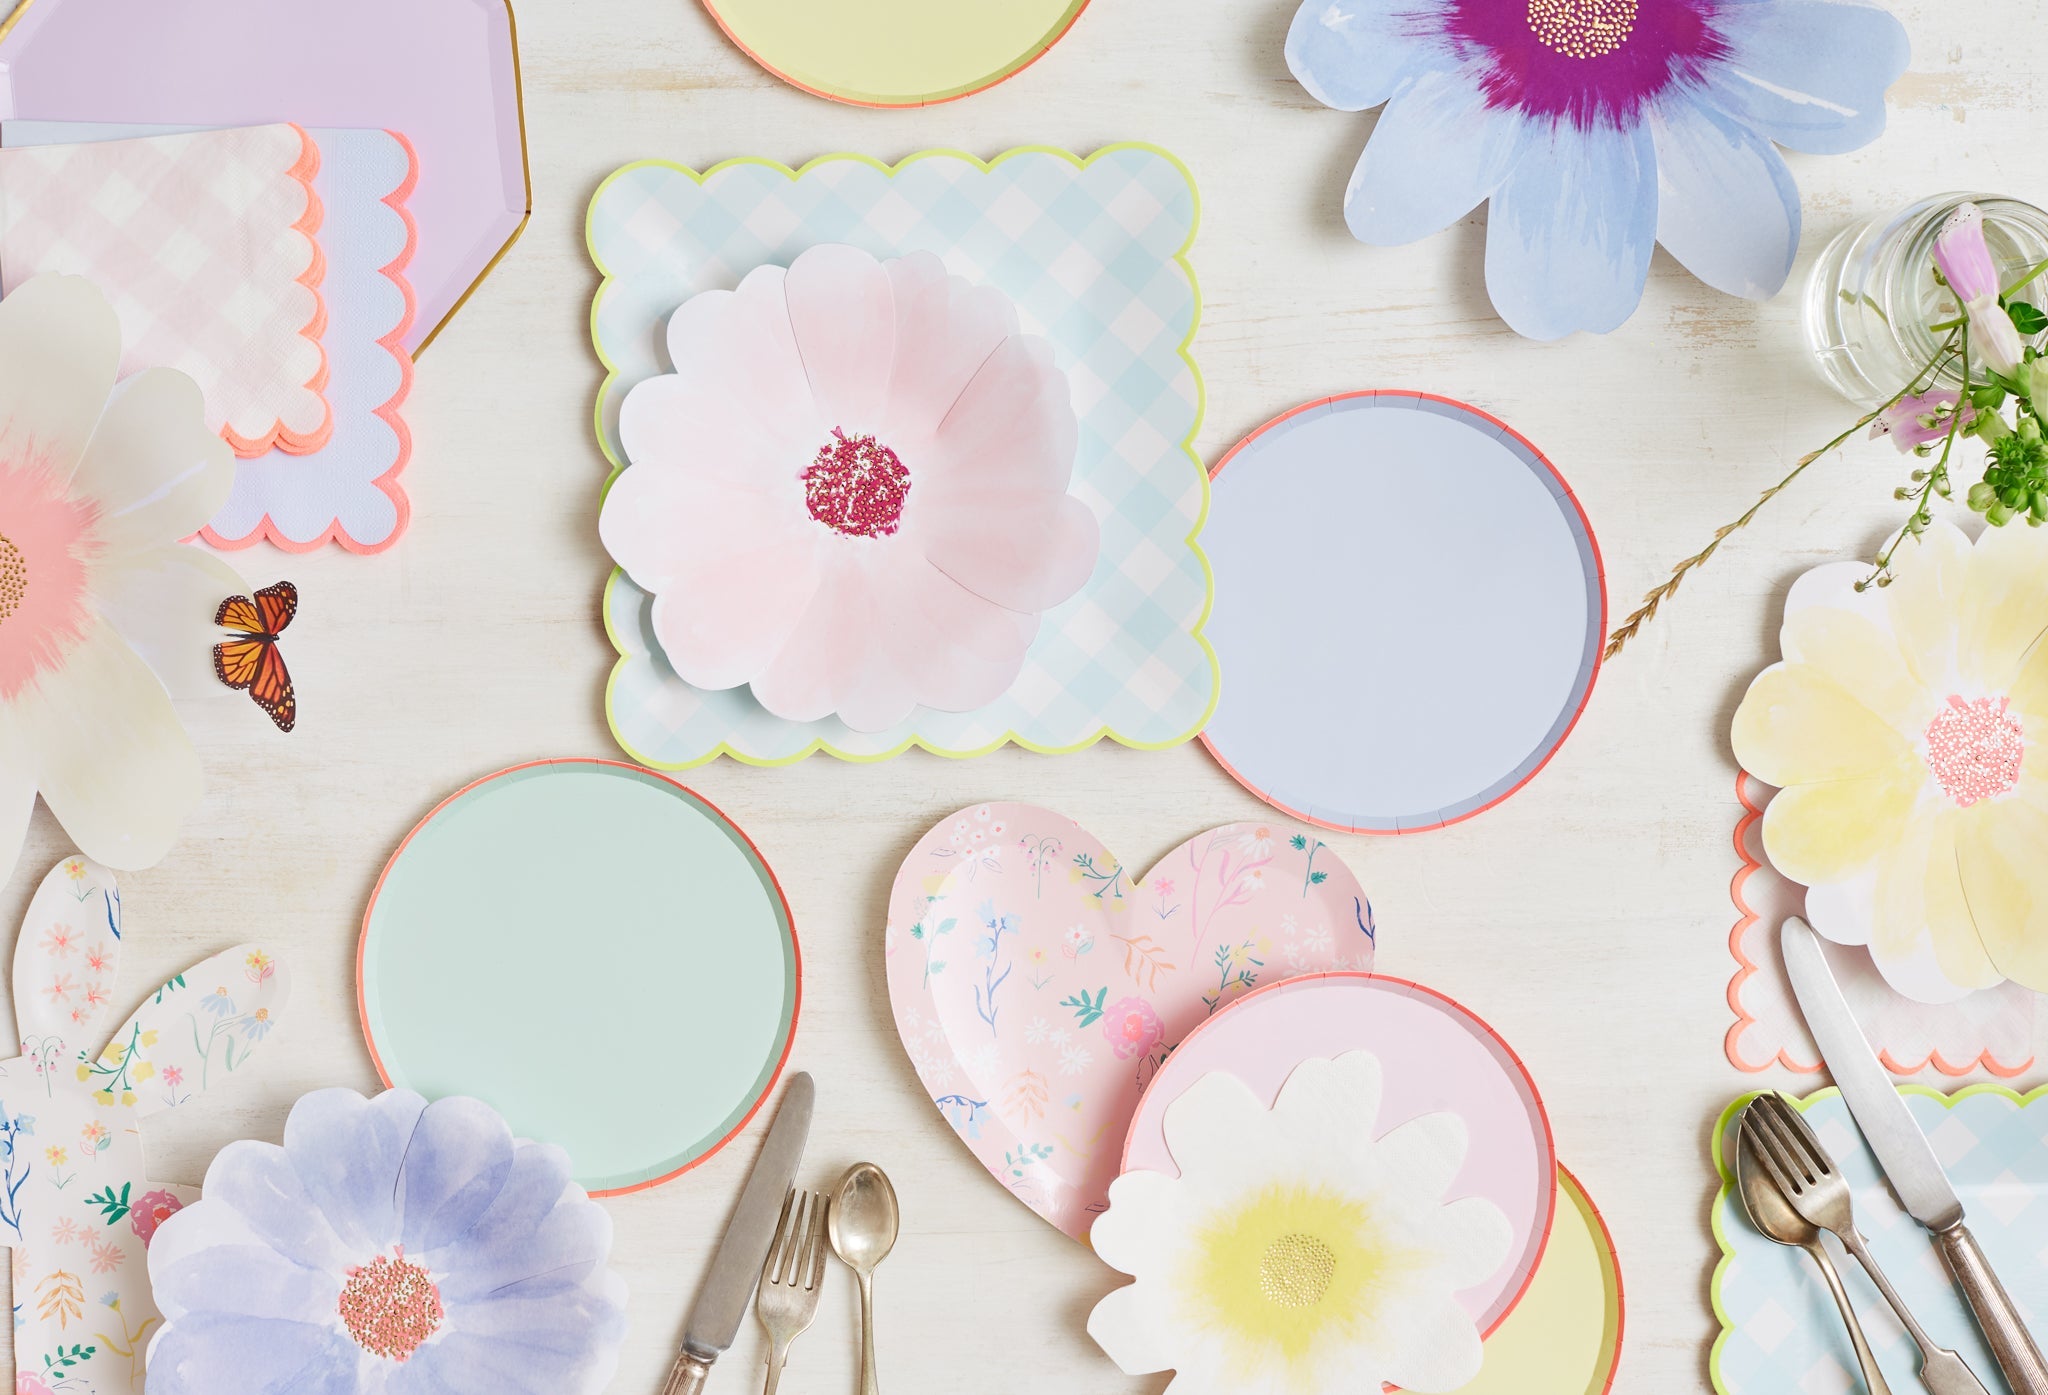 Come shop at Oh So Fancy Party to find modern, stylish paper plates that will coordinate with all your party theme needs.